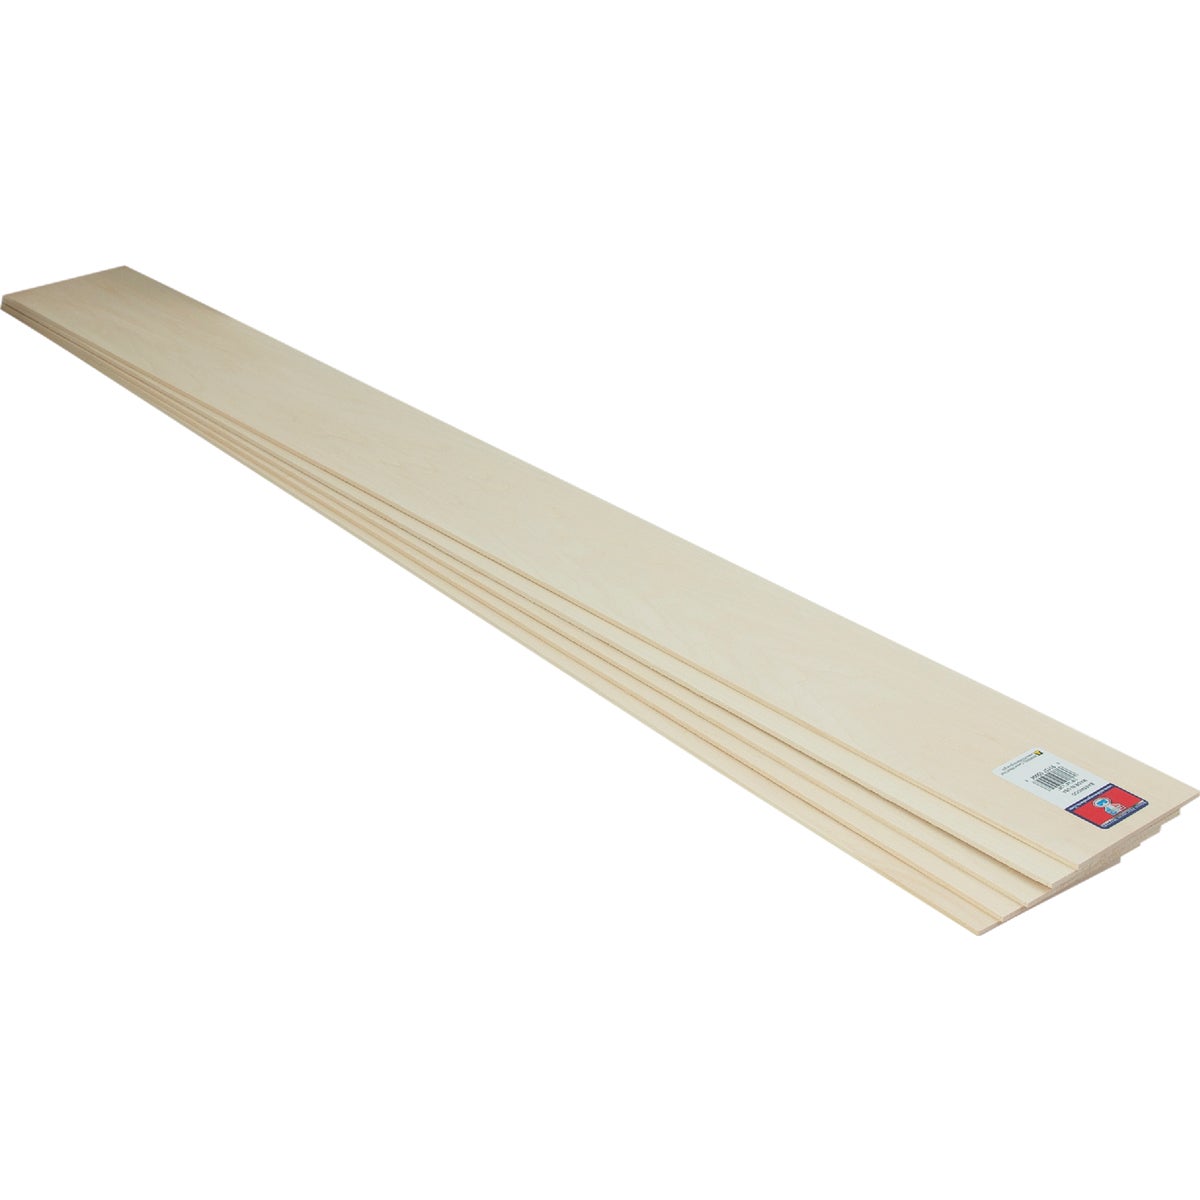 Midwest Products 3/32 In. x 3 In. x 3 Ft. Basswood Board